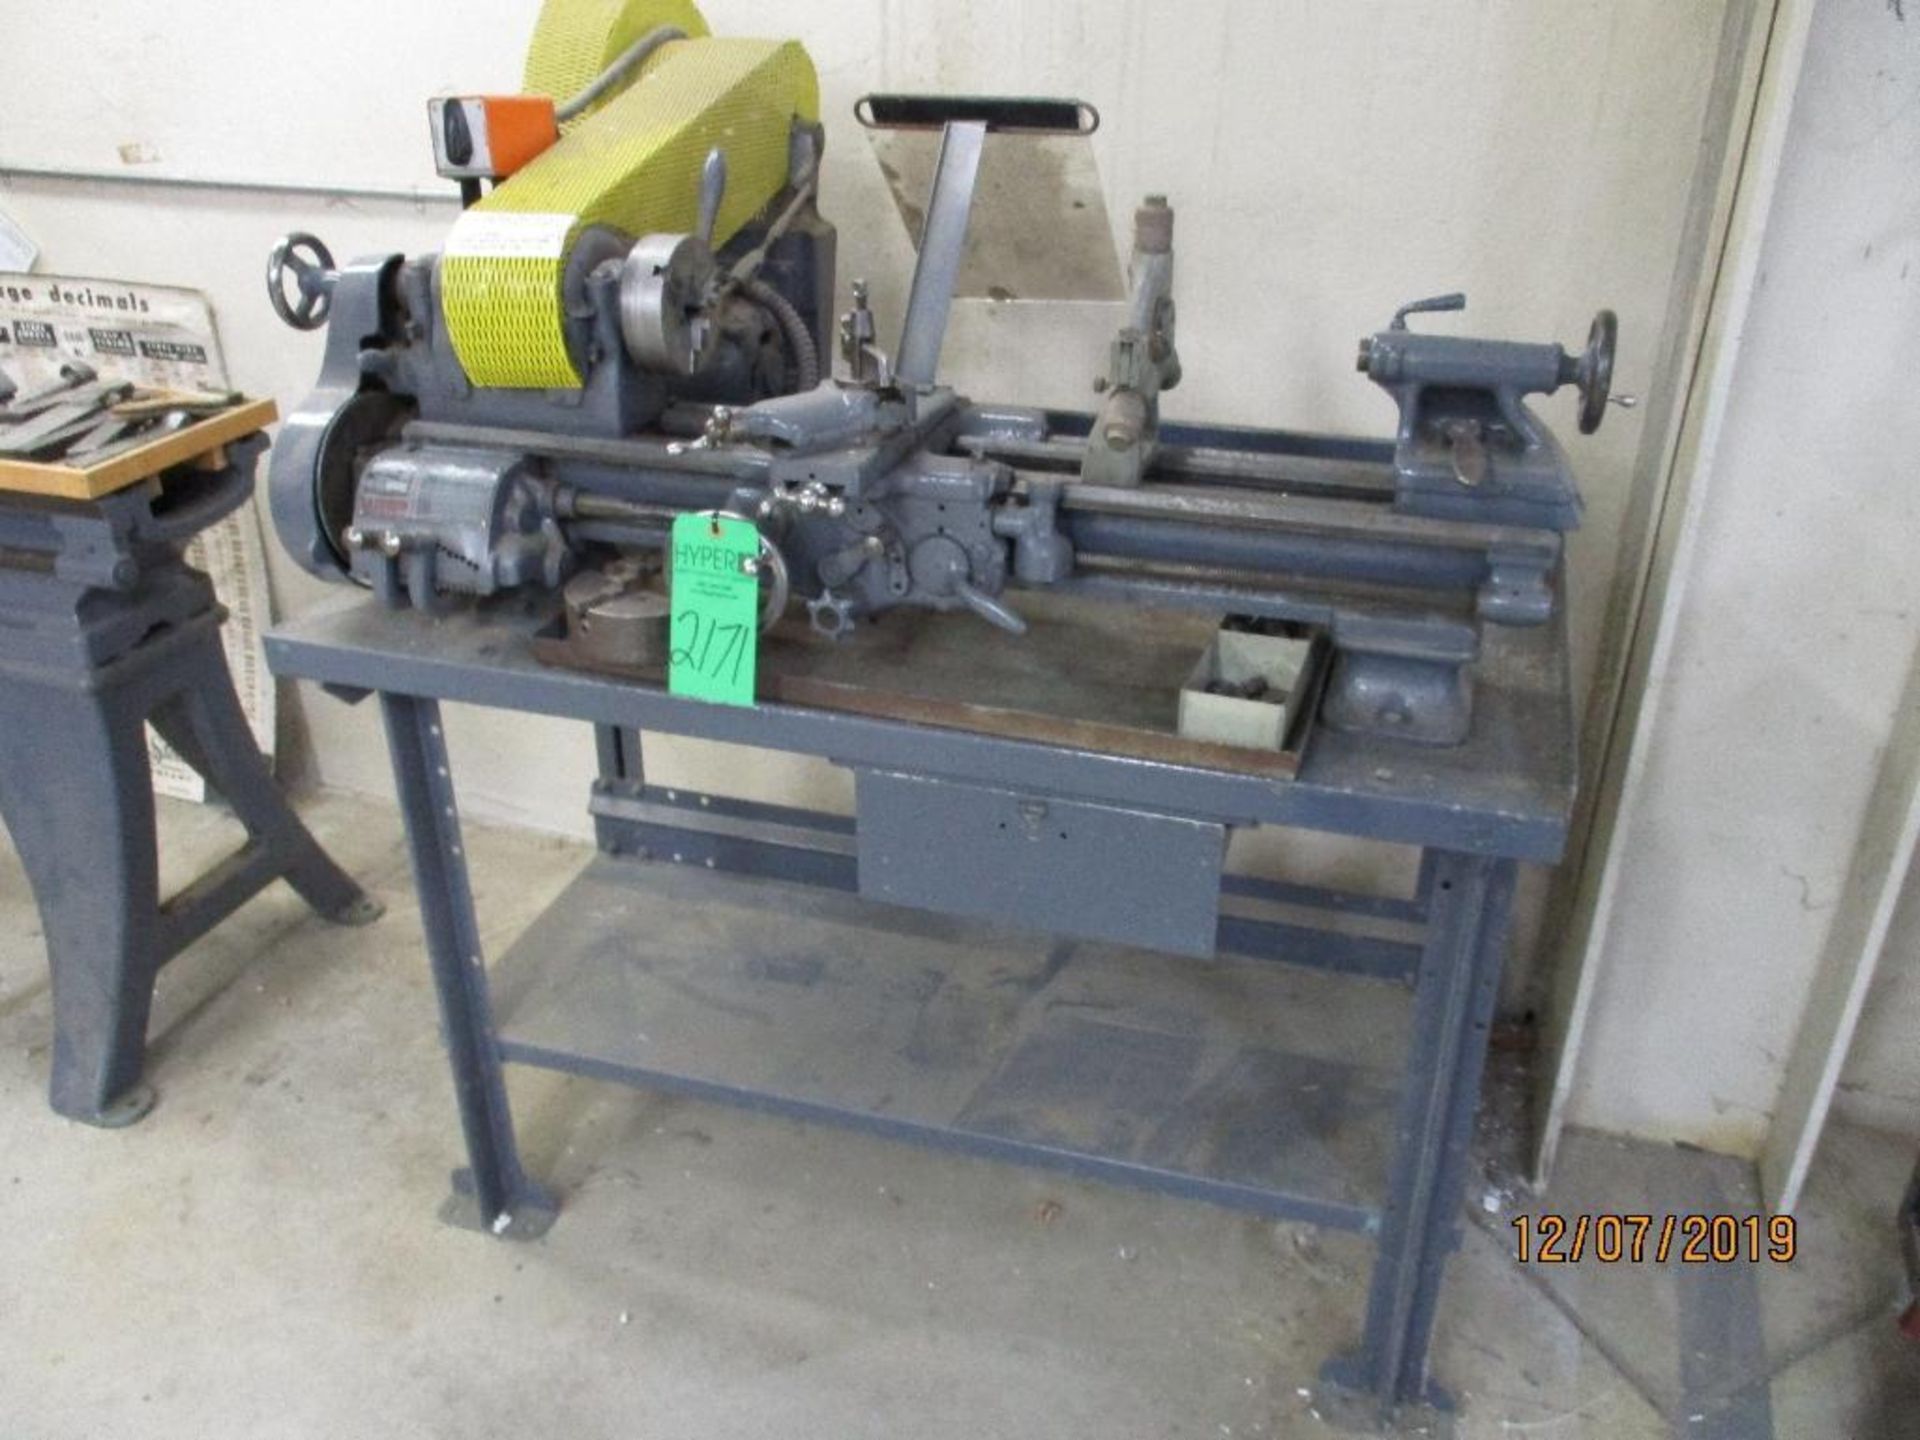 Southbend Precision Lathe With Steady Rest, 9" Swing, 2' Between Centers, 3/4" Hole Thru Center, 5"